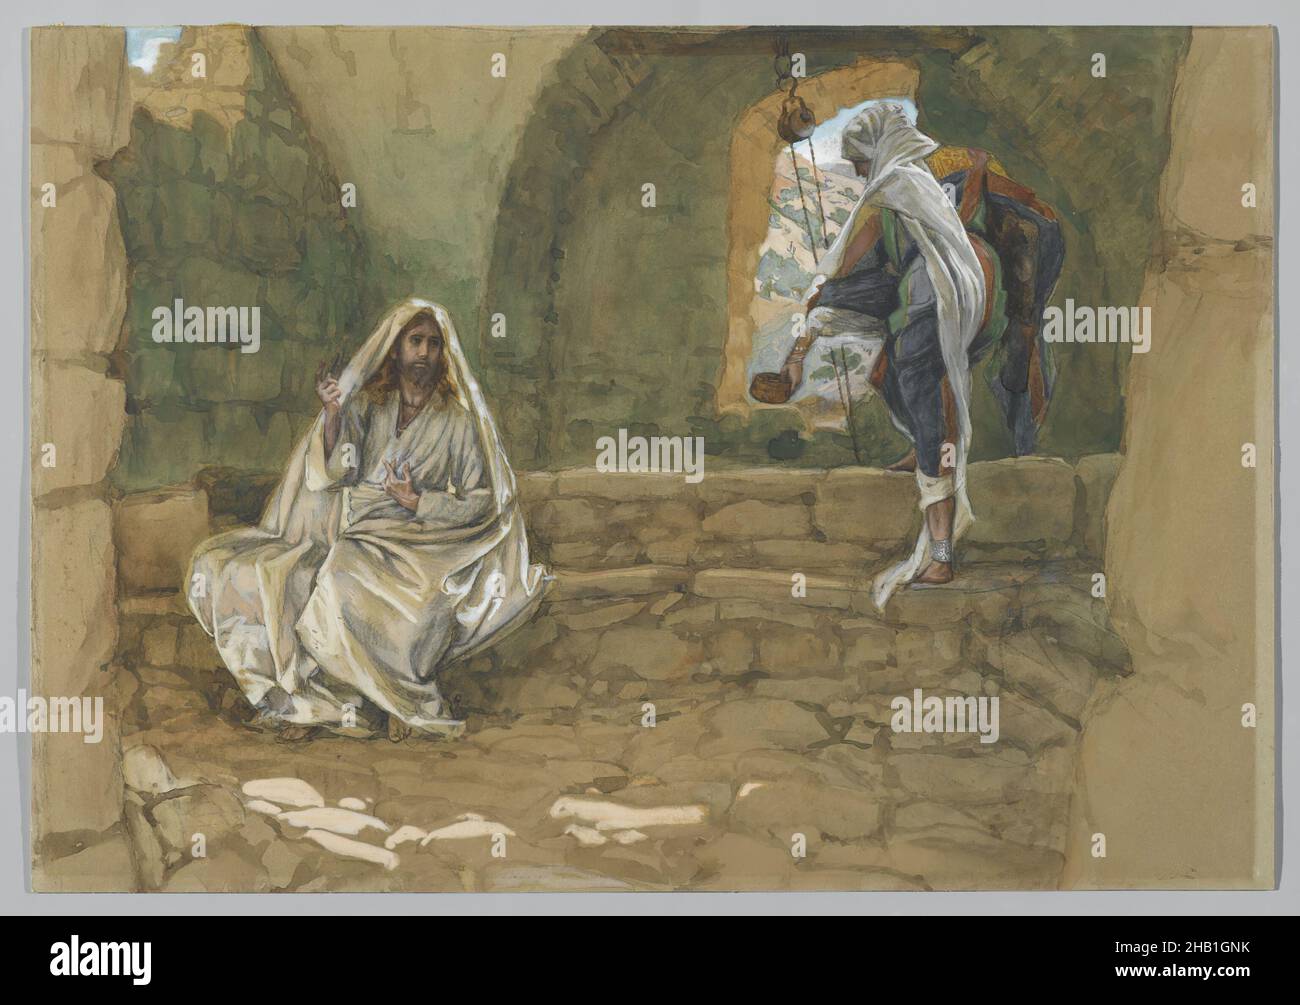 The Woman of Samaria at the Well, La Samaritaine à la fontaine, The Life of Our Lord Jesus Christ, La Vie de Notre-Seigneur Jésus-Christ, James Tissot, French, 1836-1902, Opaque watercolor over graphite on gray wove paper, France, 1886-1894, Image: 10 5/16 x 14 13/16 in., 26.2 x 37.6 cm, bible, christian stories, french, harlot, illustrations, Jesus, John 4:4-14, new testament, religious, religious art, steps, story, Tissot, water, watercolor Stock Photo